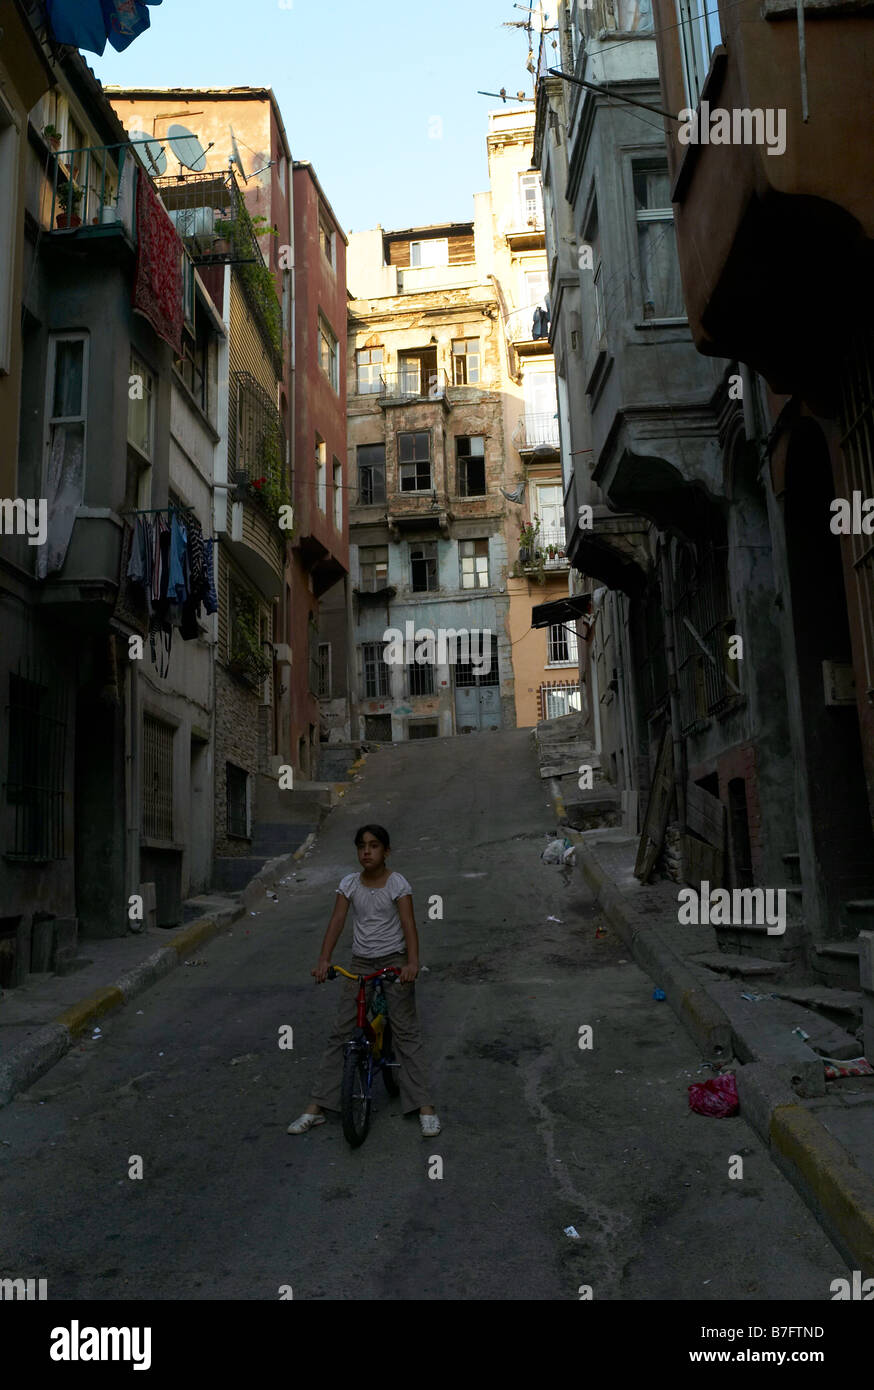 A young girl cycling down a street in Istanbul Turkey Stock Photo